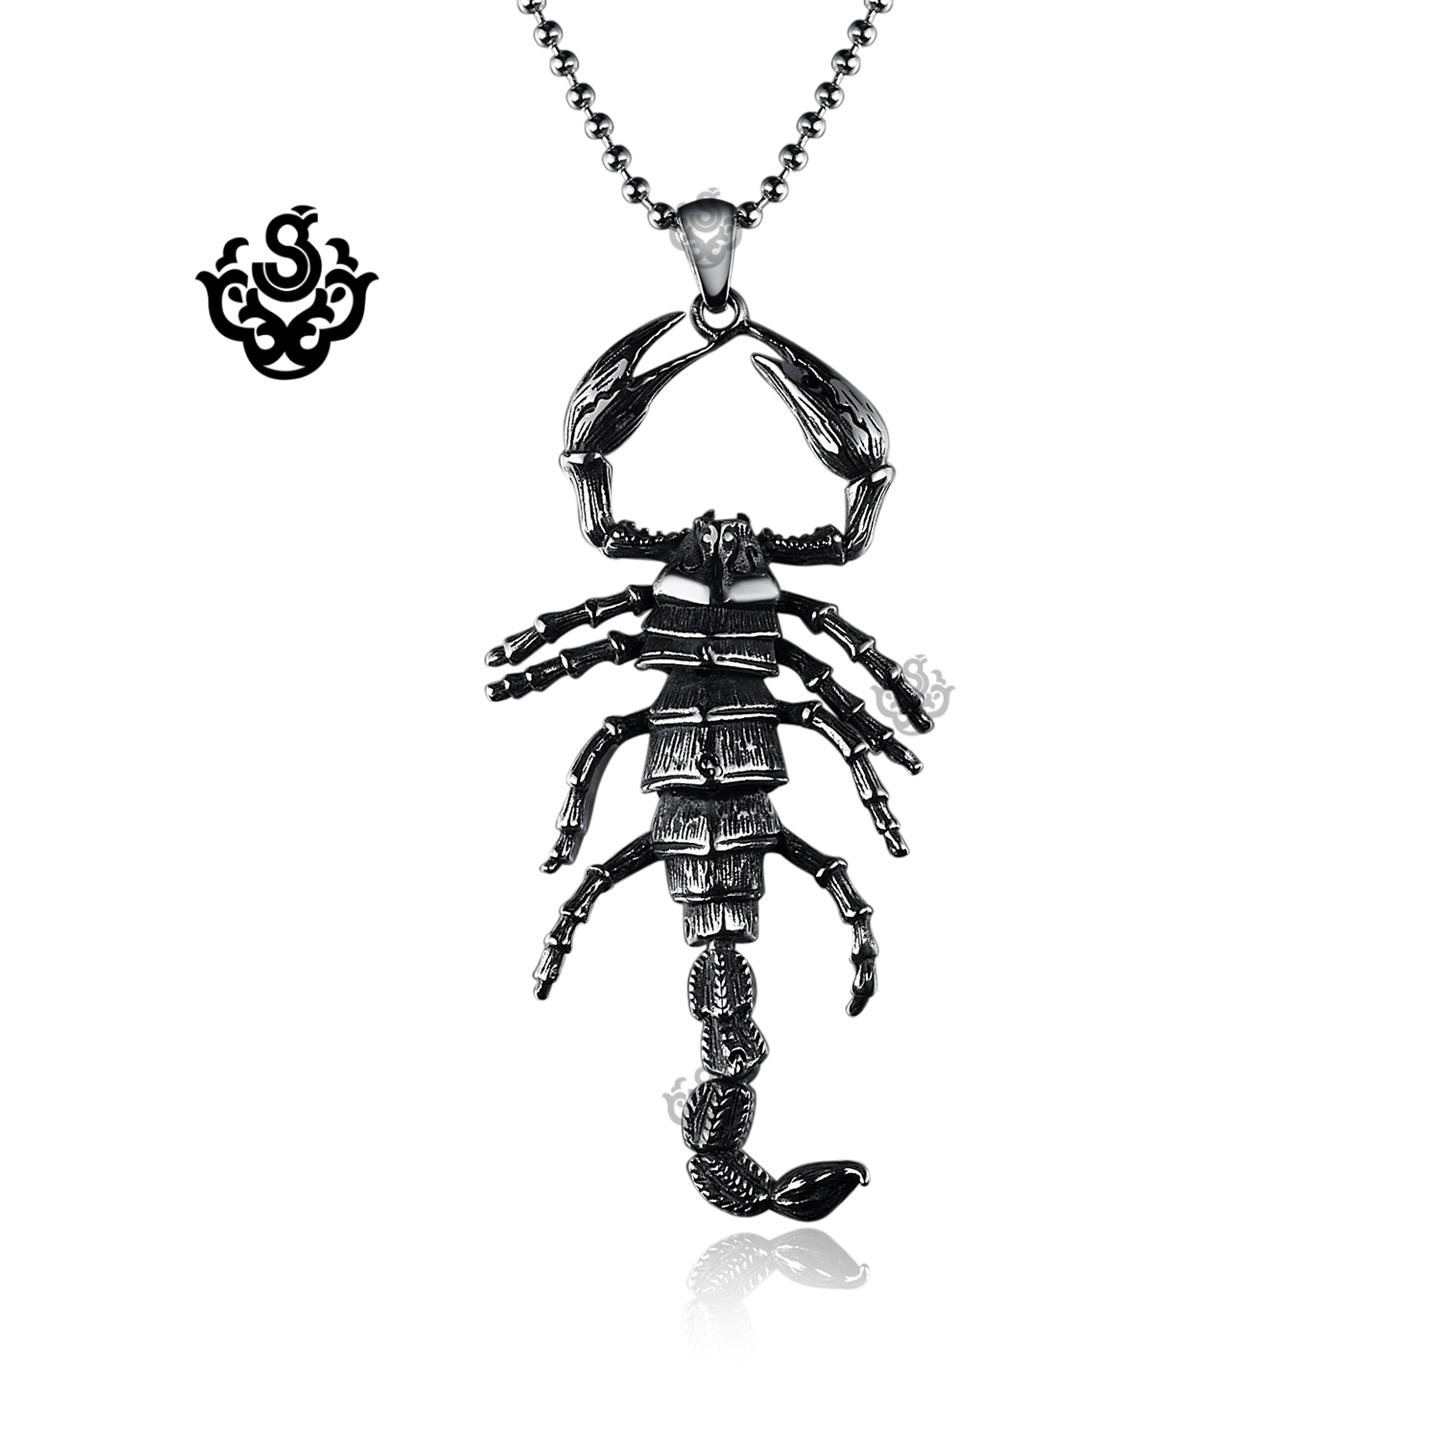 T/&T 316 Stainless Steel Scorpion Pendant Necklace With Black Onyx NP110